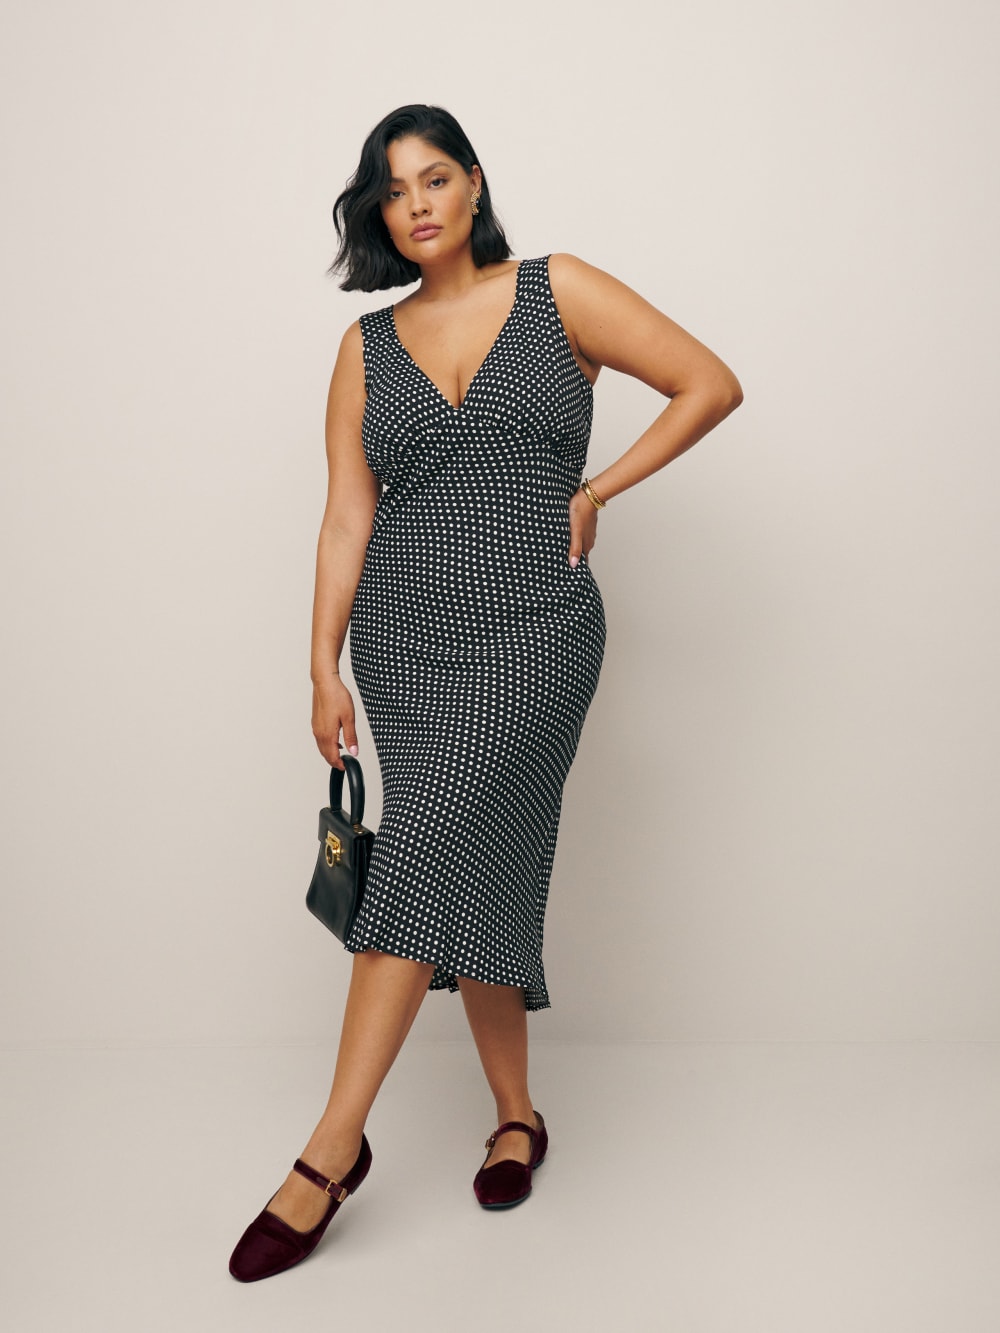 Reformation Beauden polka dot midi dress in navy and white has Adjustable wide straps, v-neck neckline and a bias cut. 